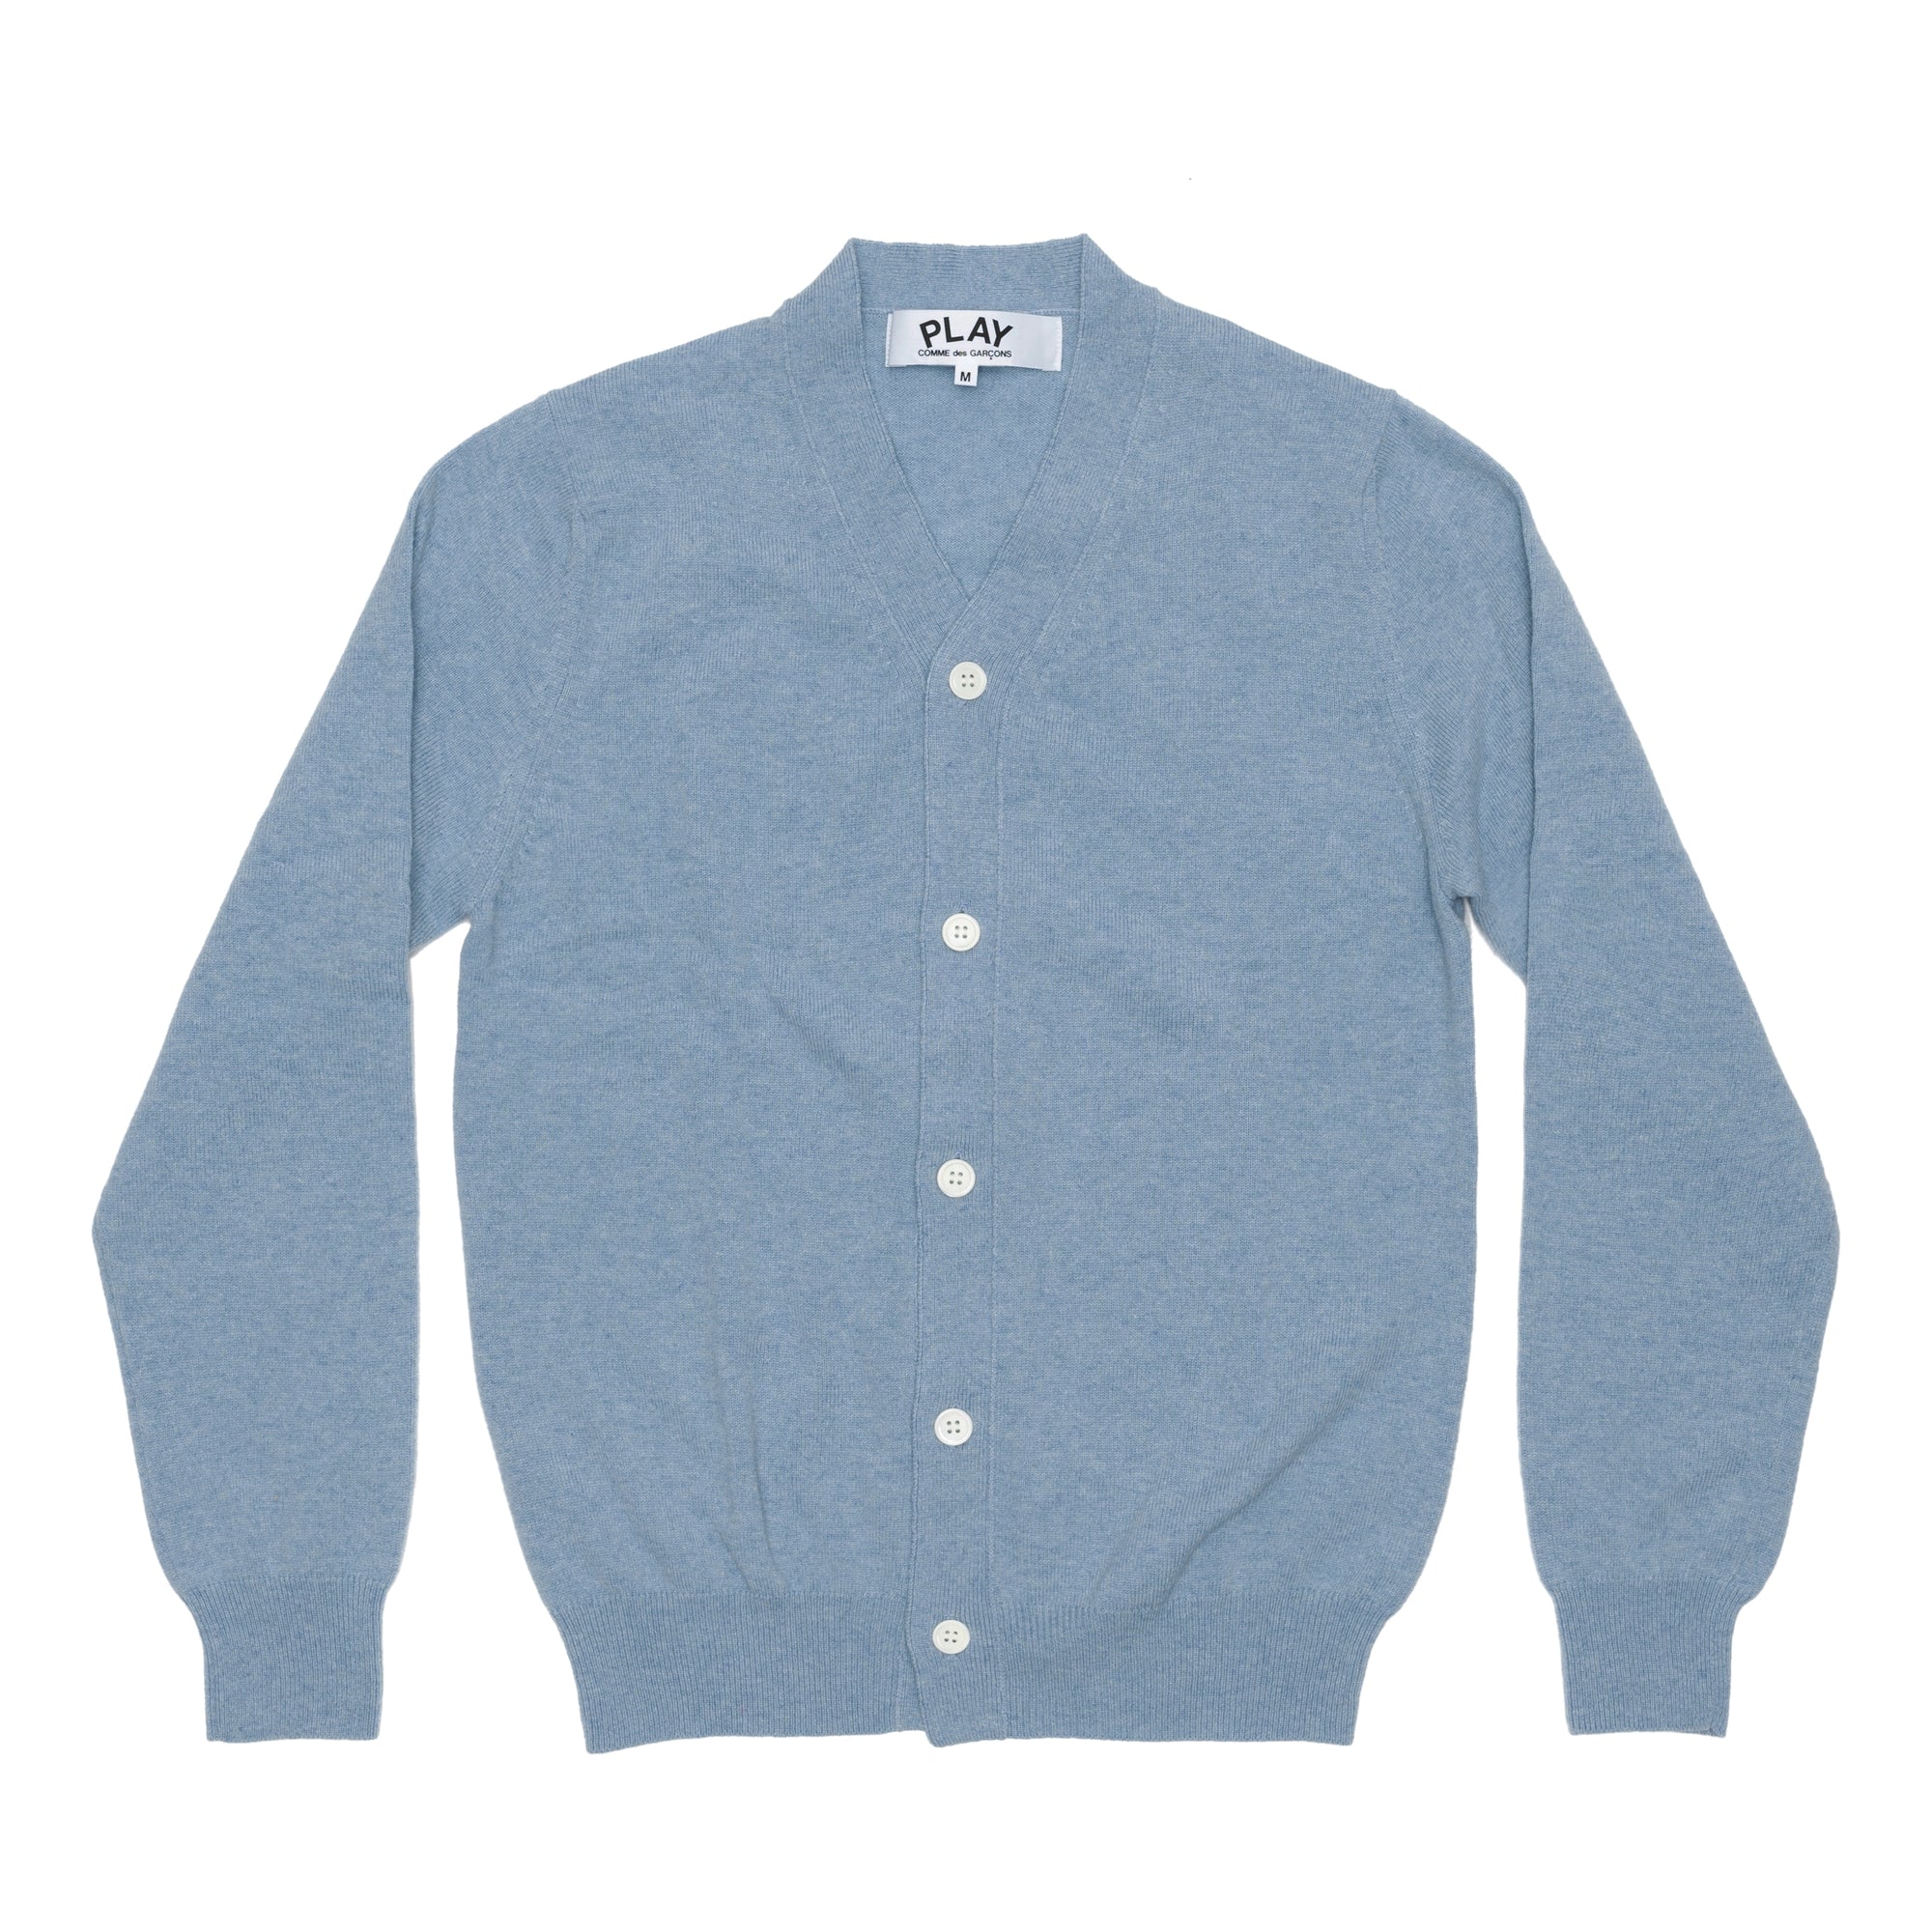 PLAY CDG  - Top Dyed Carded Lambswool Men's Cardigan - (Blue) view 1